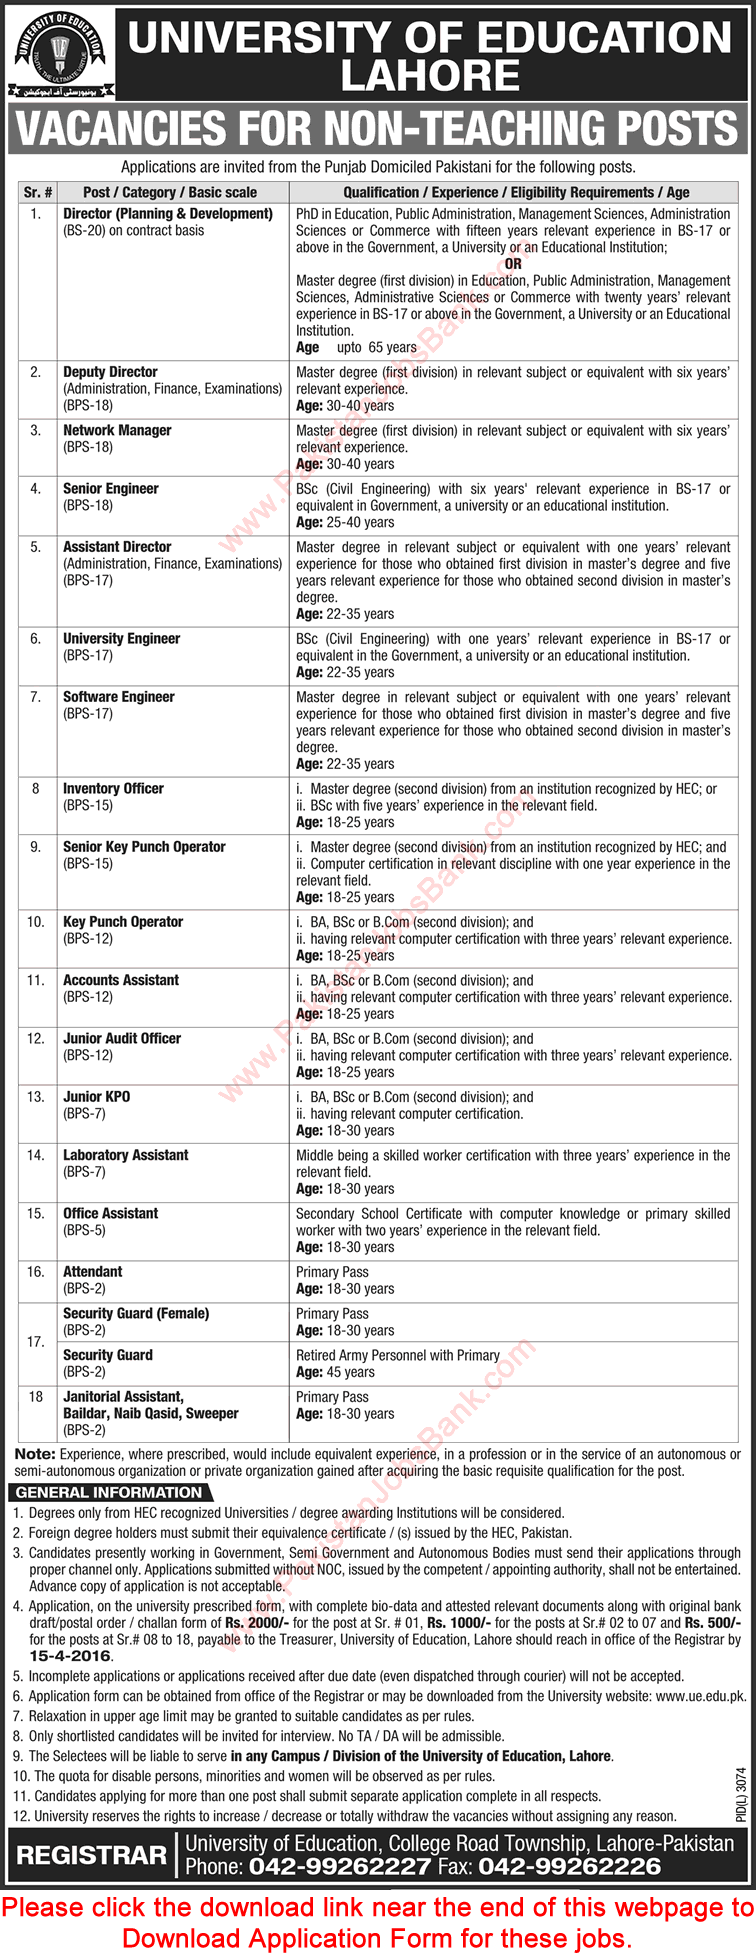 University of Education Lahore Jobs 2016 March / April Non-Teaching Application Form Download Latest